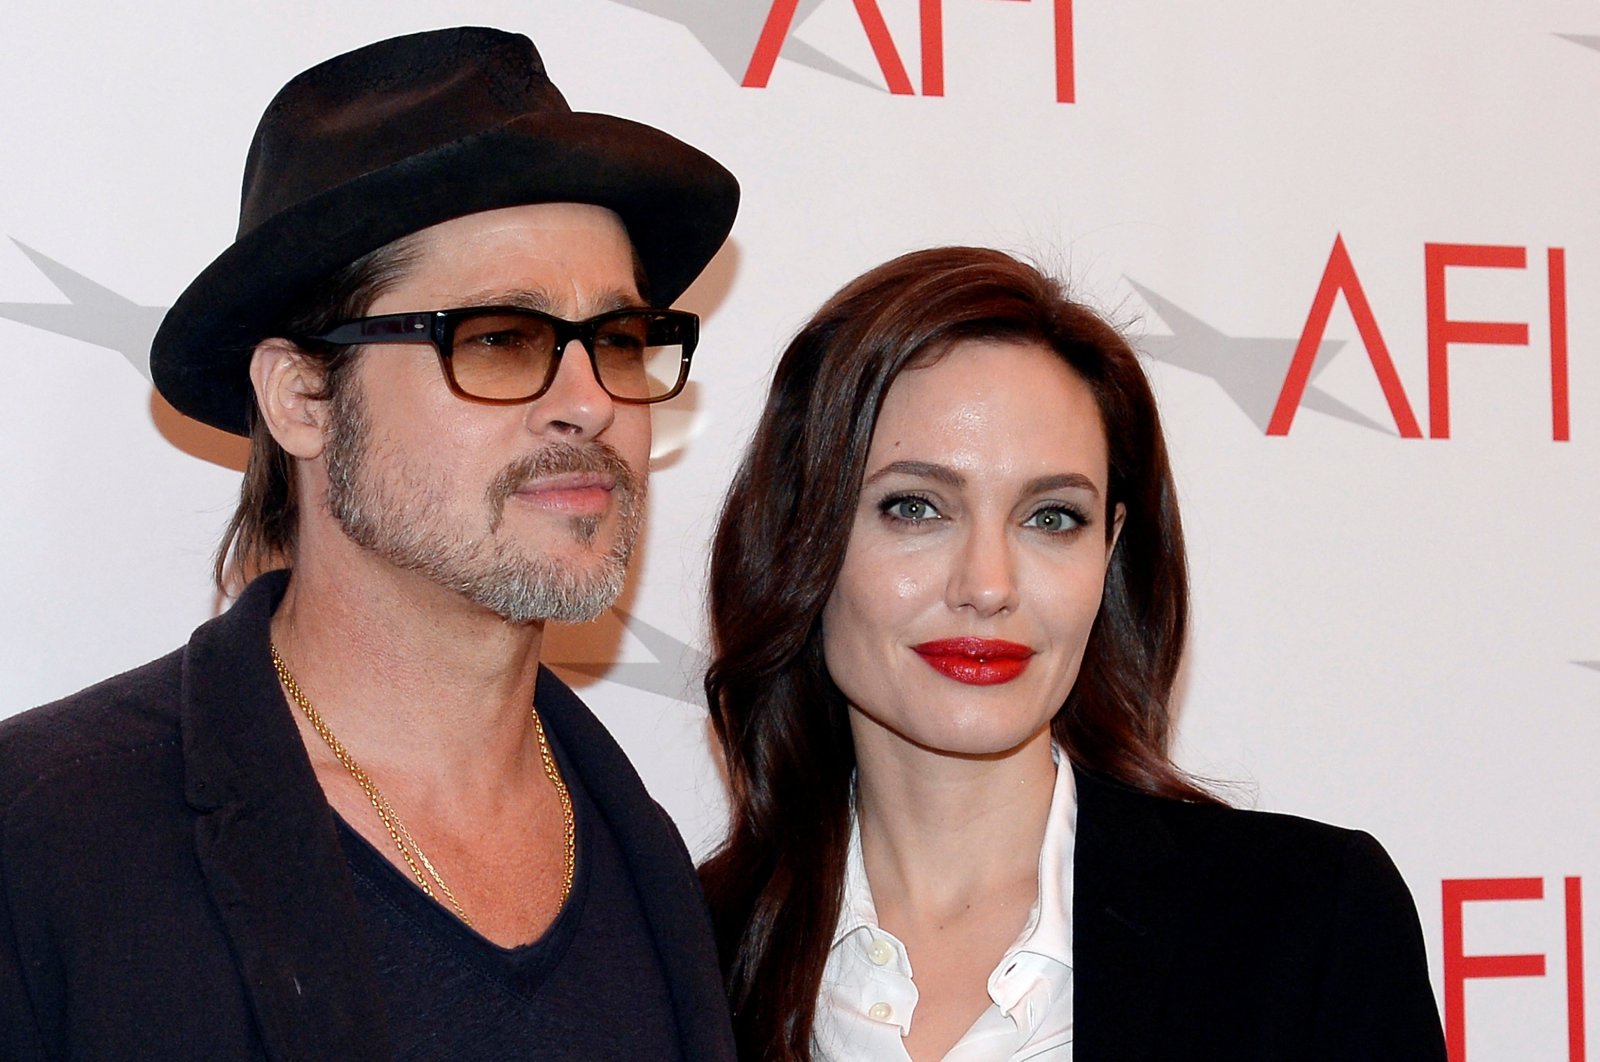 Brad Pitt and Angelina Jolie pose at the AFI Awards honoring excellence in film and television in Beverly Hills, California, U.S., Jan. 9, 2015. (Reuters File Photo)